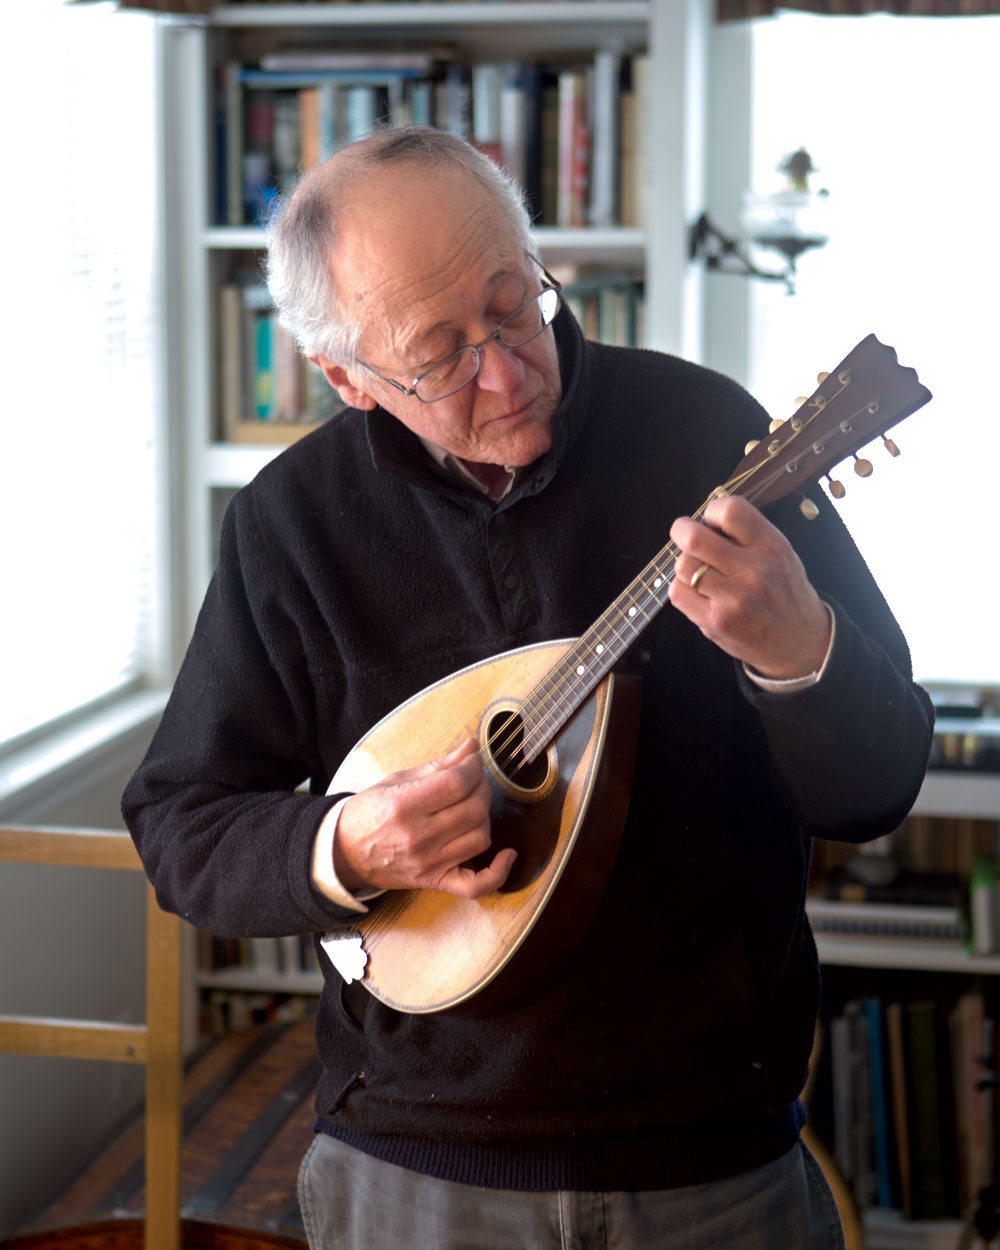 Few people know the island’s history, geography, and stories as well as Joe Bains, pictured here at his home with his mandolin. His grandfather came to Prudence Island in the late 19th century; his parents met on the island and moved here full-time in 1948. “When my father built his house,” said Bains, who was raised and educated on the island, “every bit of siding came from used Navy ammunition boxes, and the posts and beams came from abandoned Navy buildings.” 